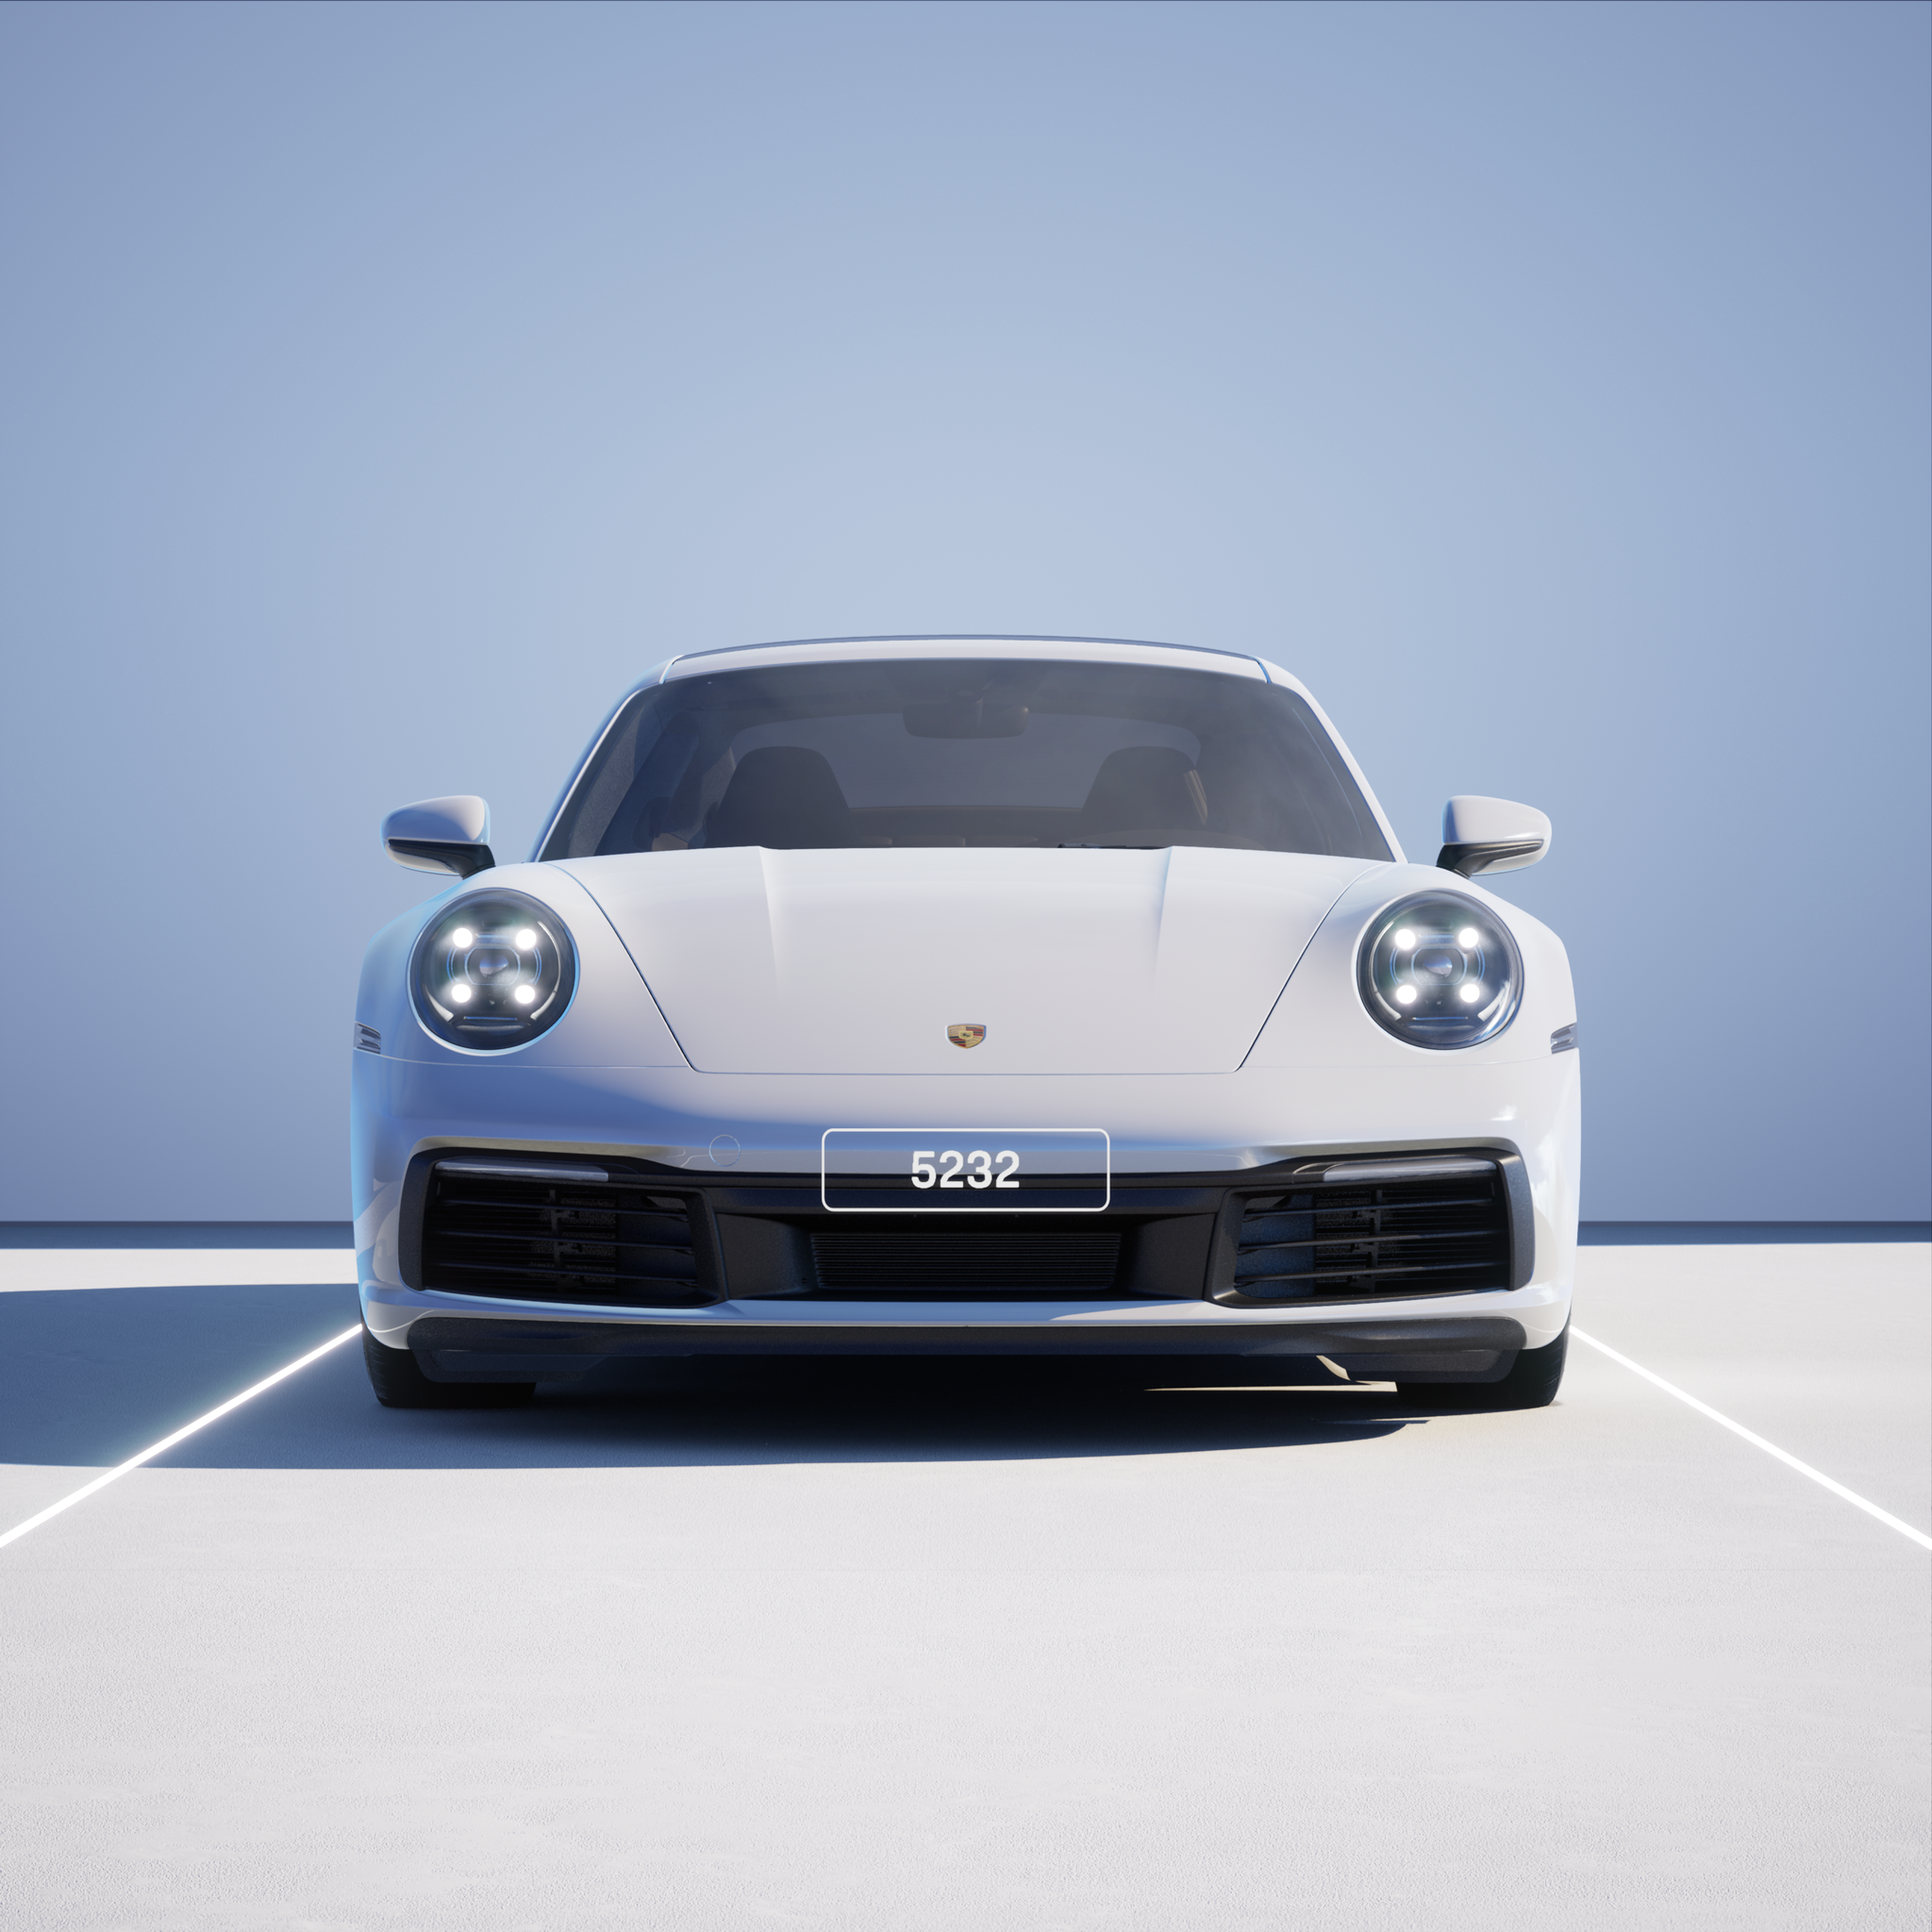 The PORSCHΞ 911 5232 image in phase